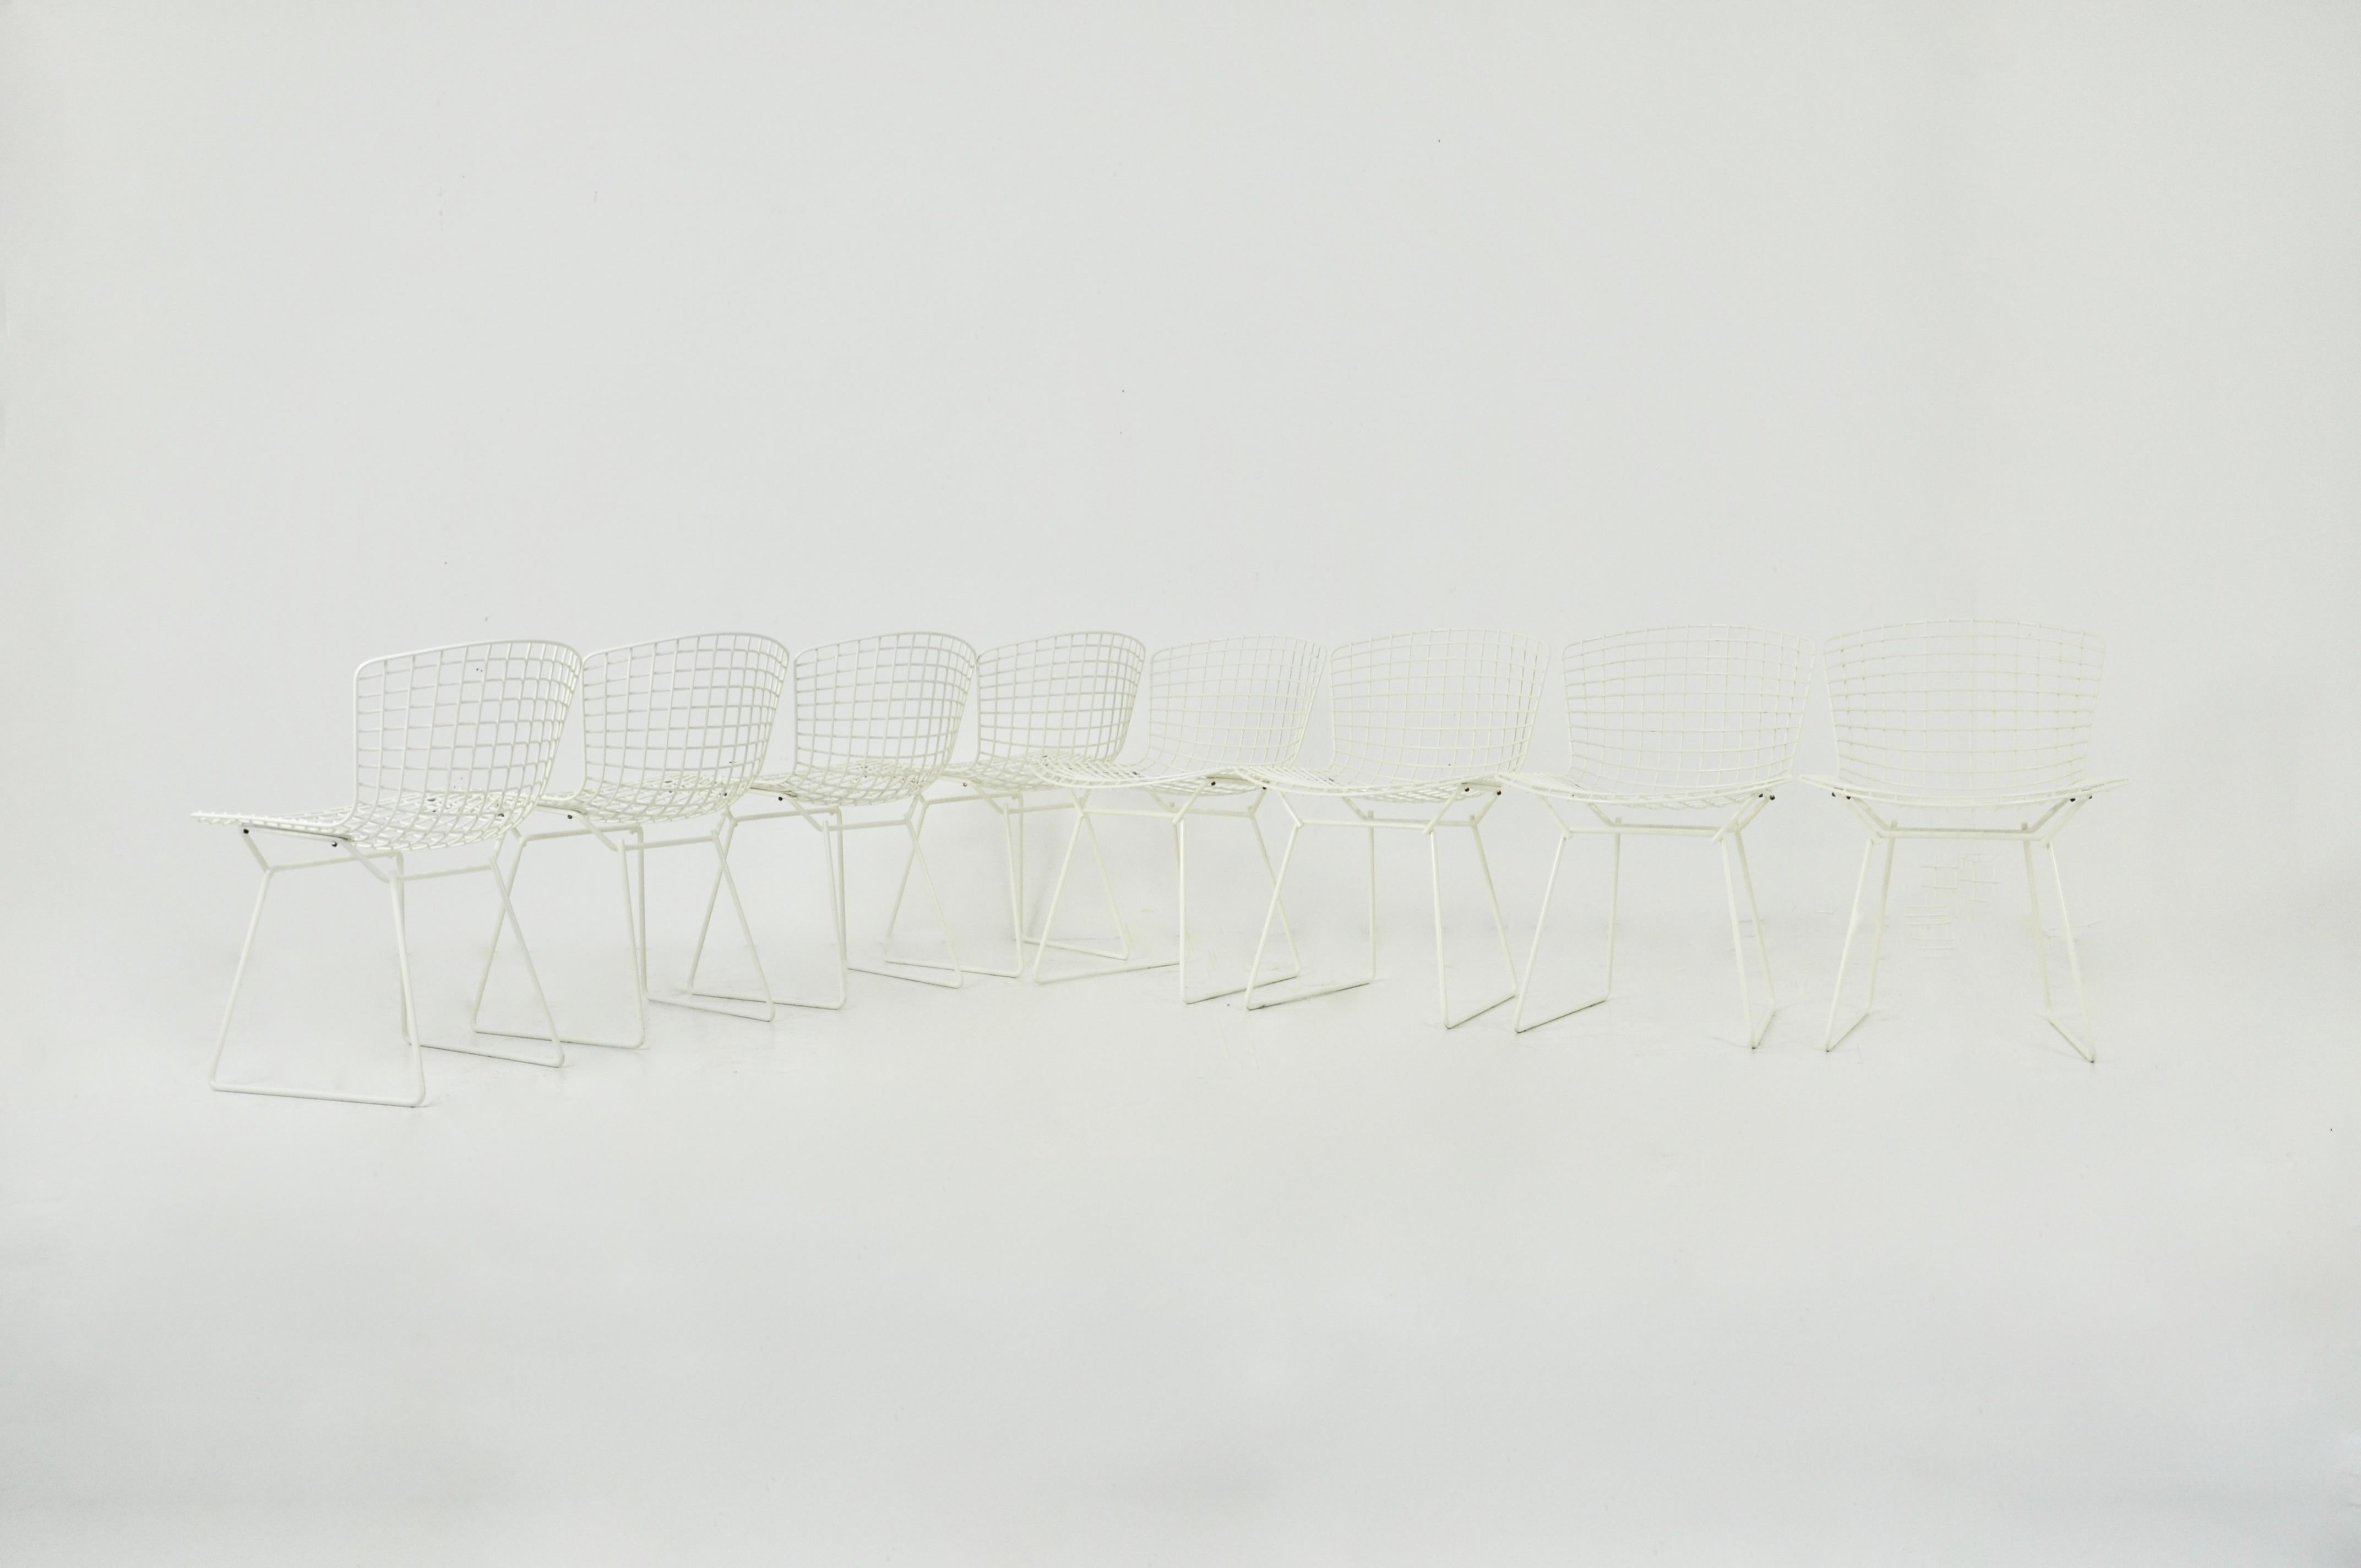 Set of 8 white metal chairs. Seat height 44 cm. Wear and tear from time and age of the chairs.